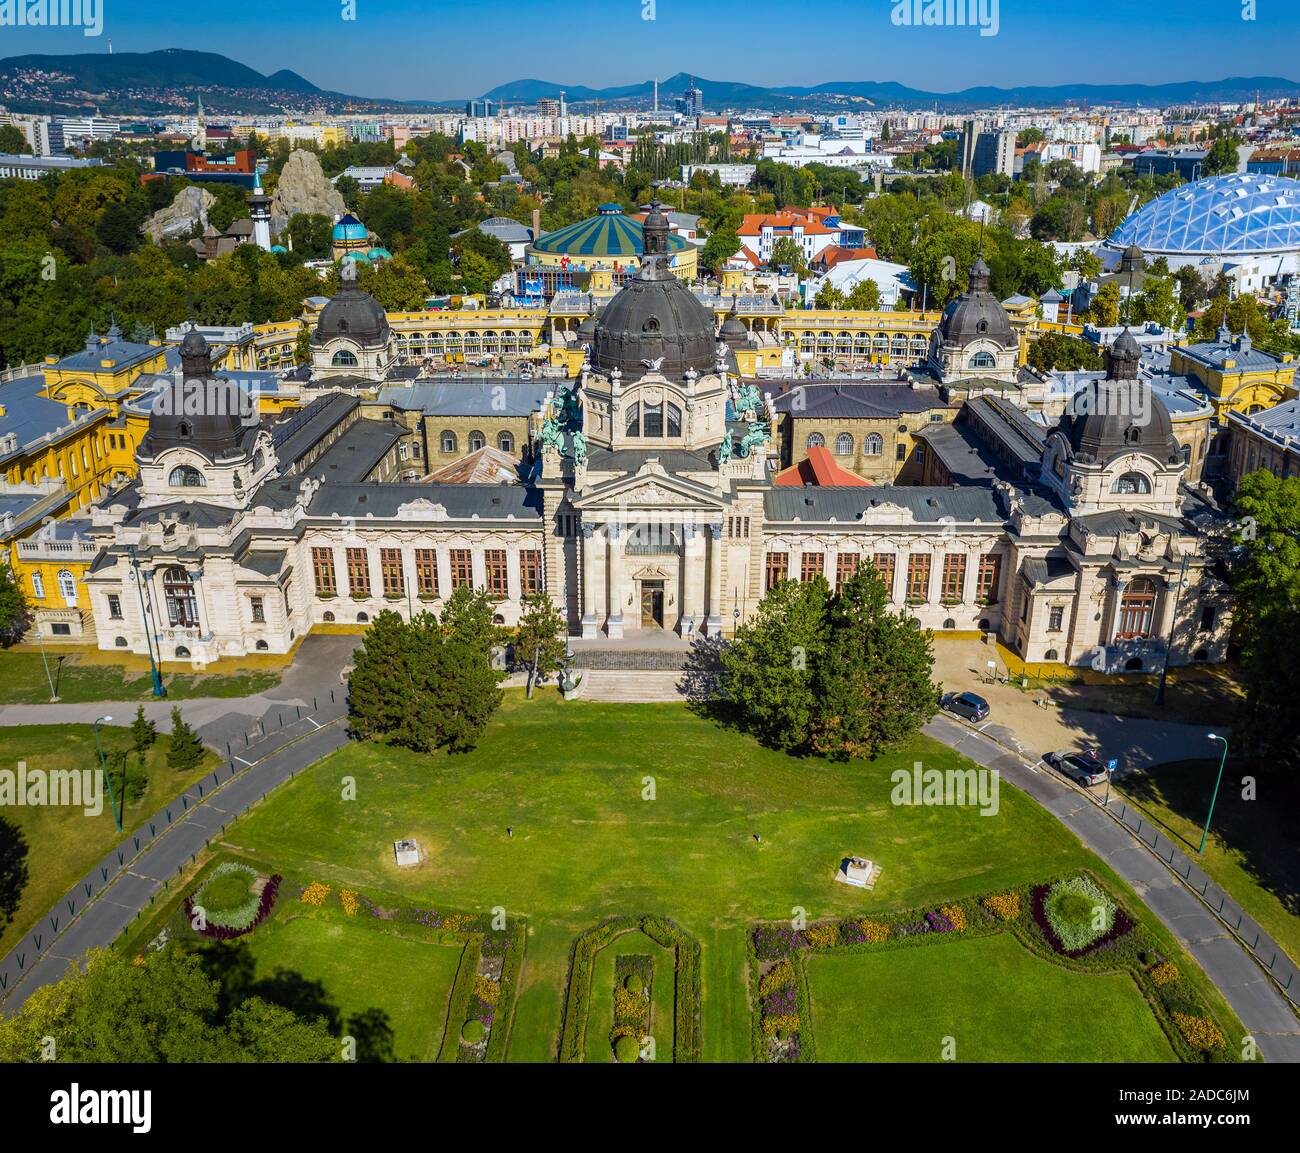 Budapest, Hungary - Aerial drone view of the famous Szechenyi Thermal Bath in City Park (Varosliget) on a sunny summer day with clear blue sky and gre Stock Photo